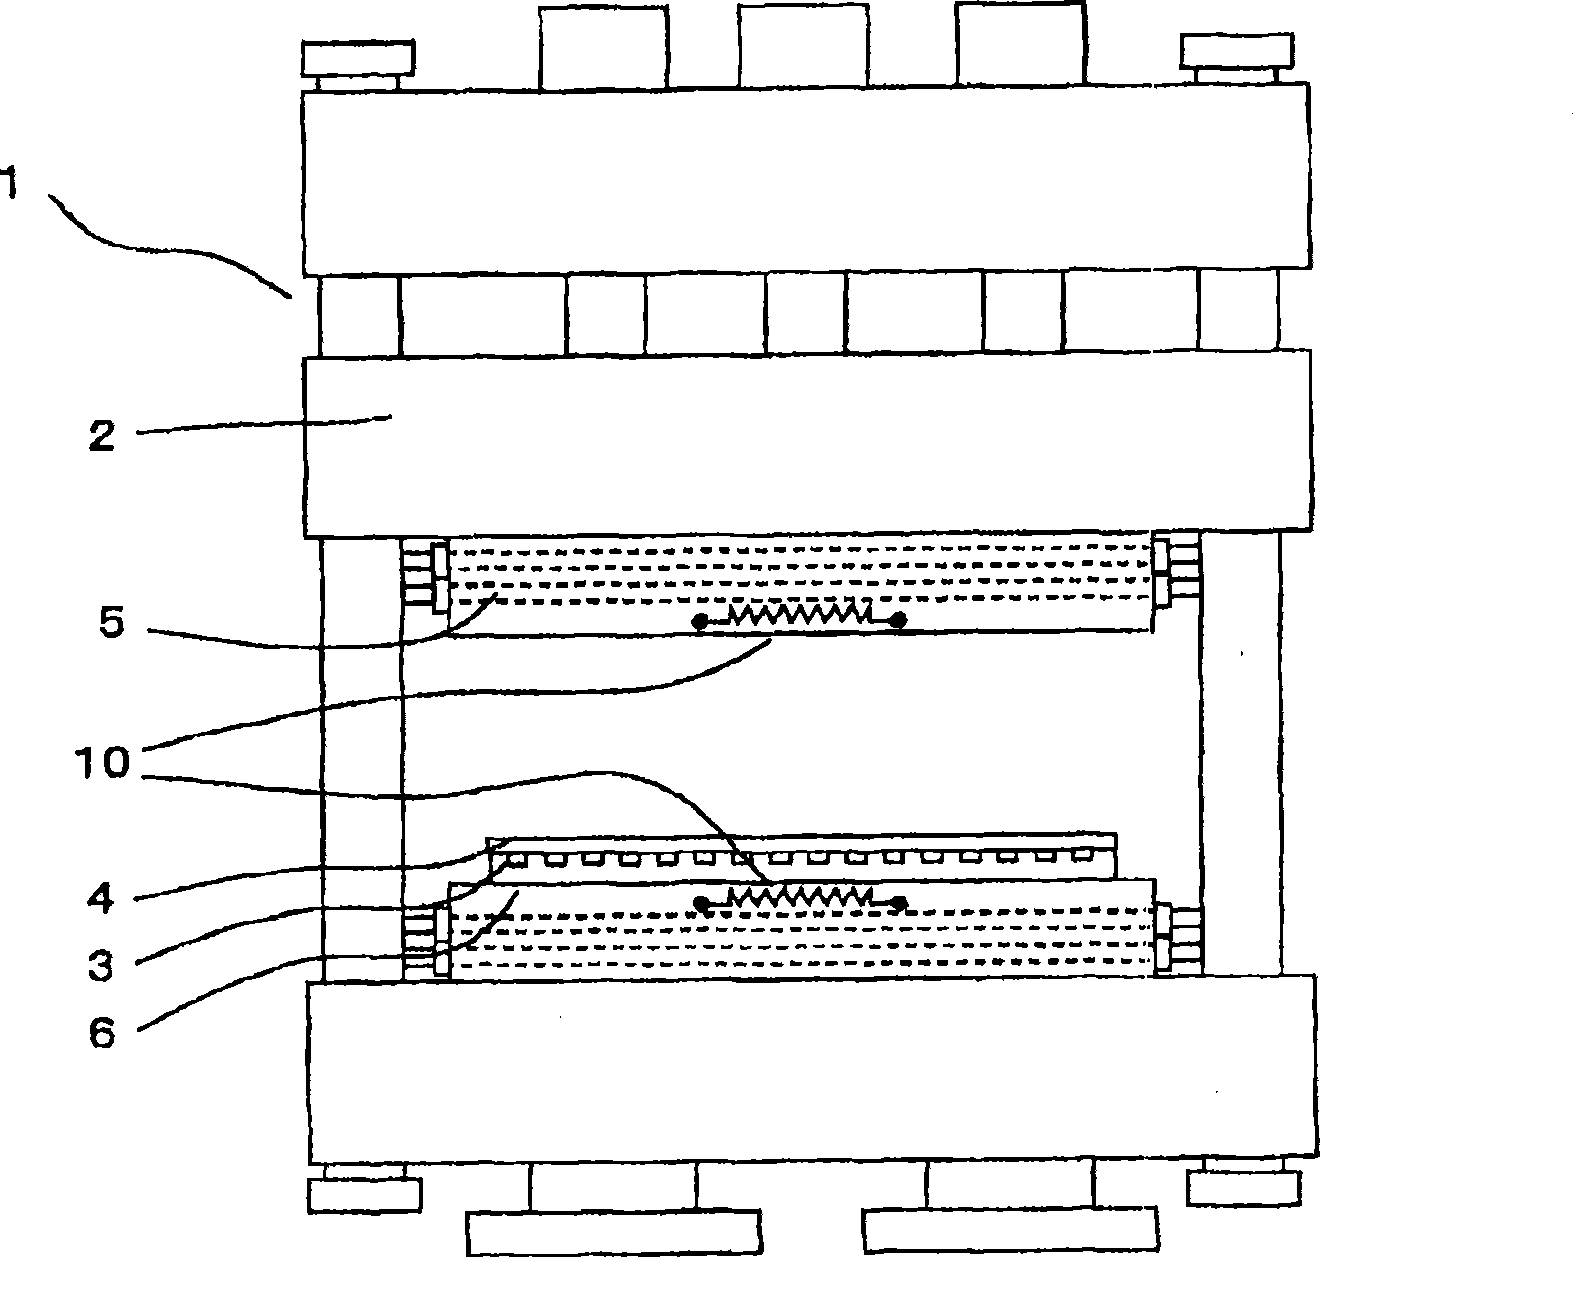 Process for producing microconfiguration transfer sheet and apparatus therefor